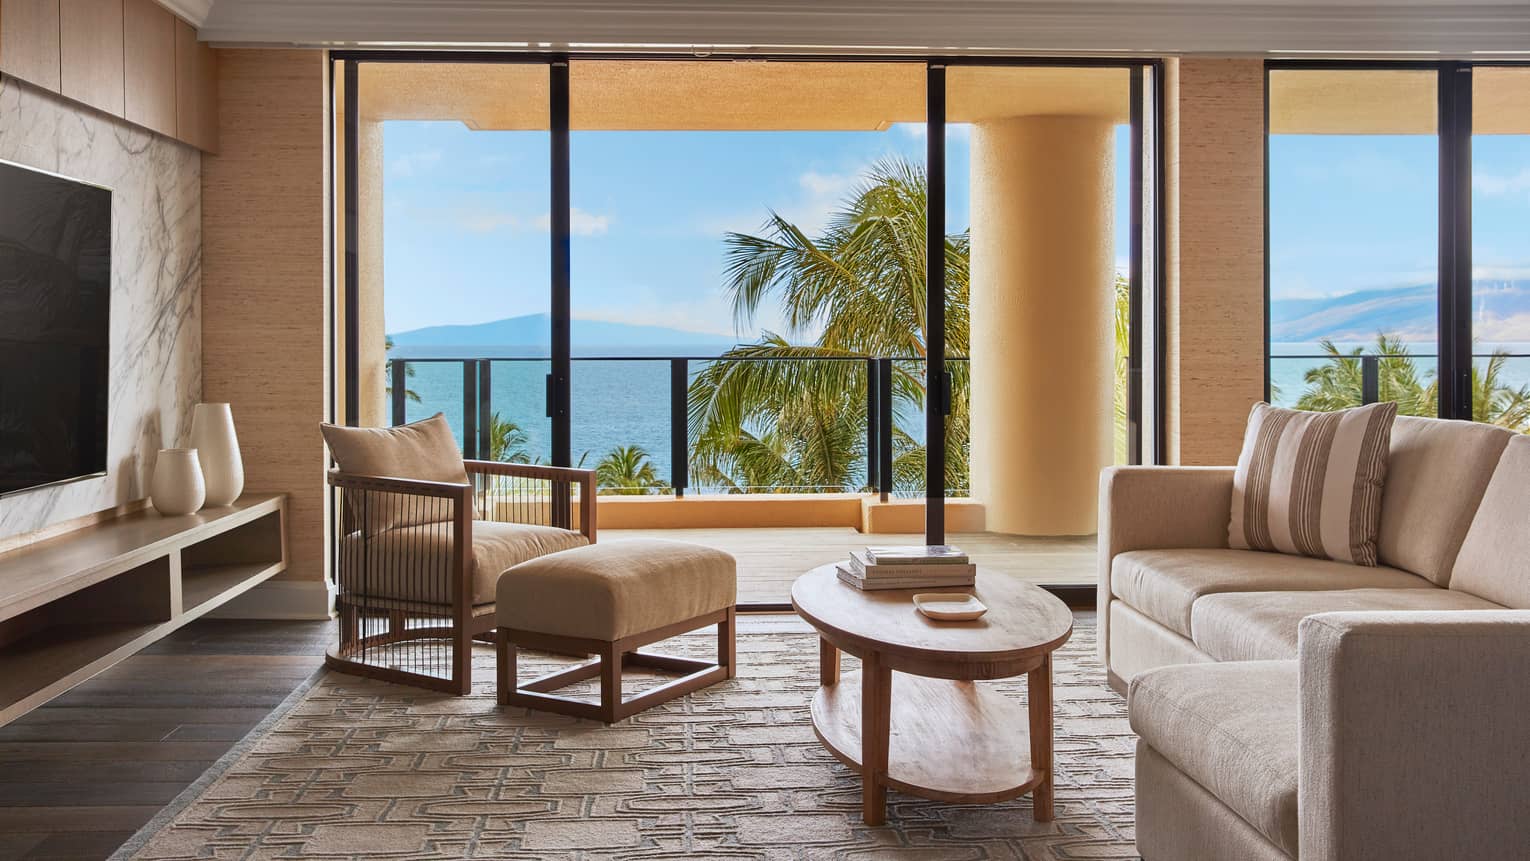 Elite Suite sitting area with doors leading out to a private terrace and a view onto the ocean